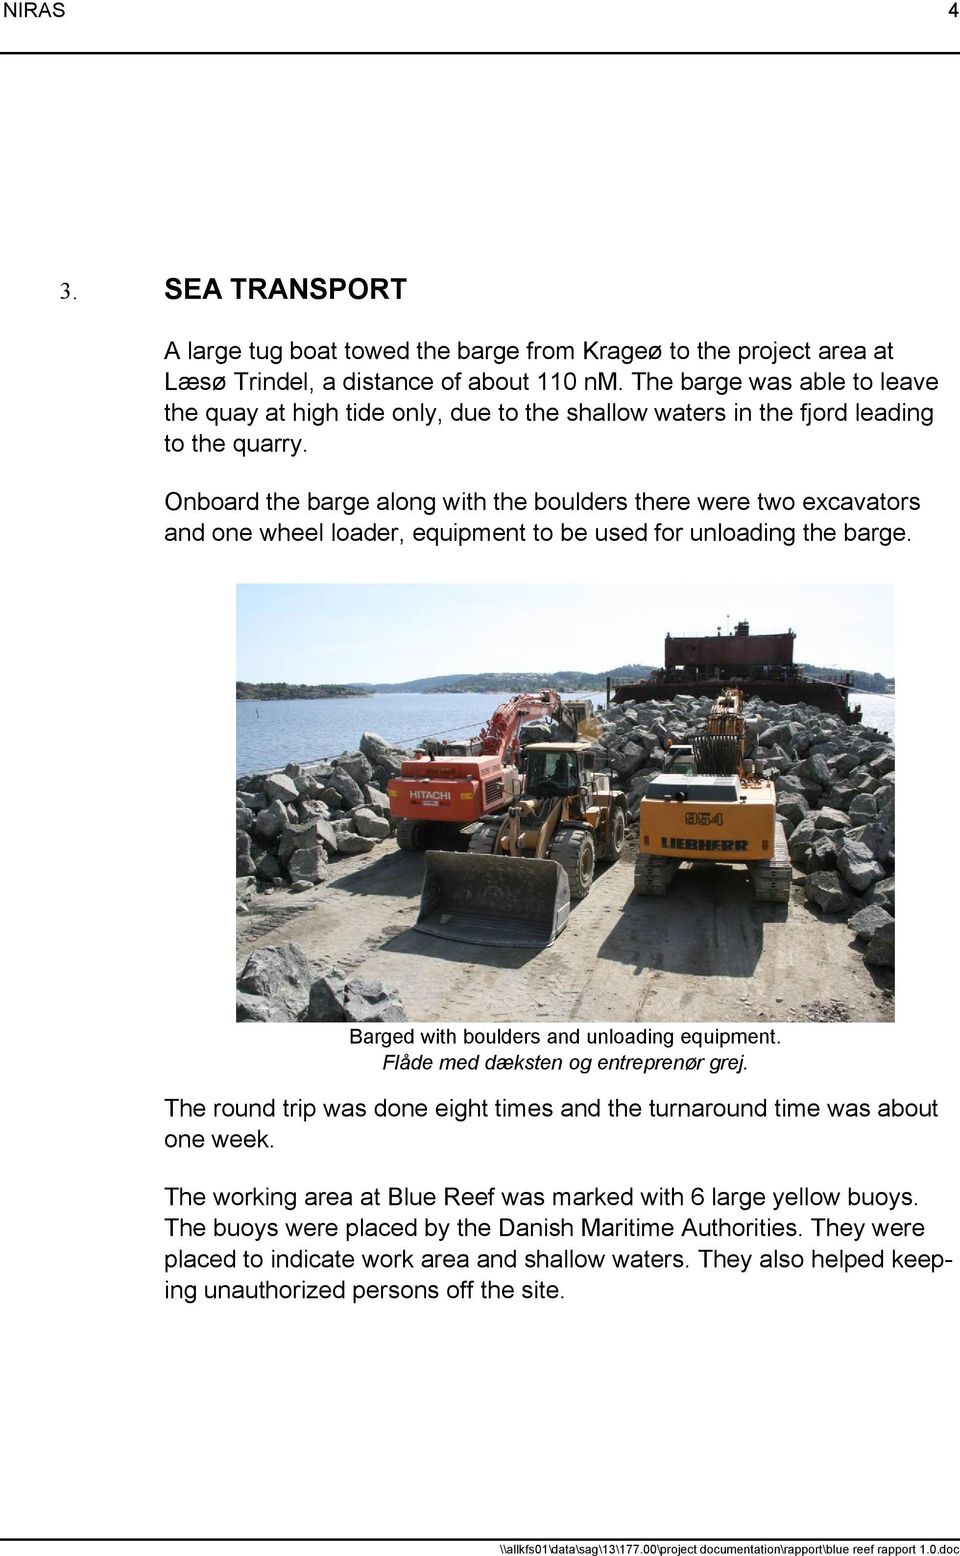 Onboard the barge along with the boulders there were two excavators and one wheel loader, equipment to be used for unloading the barge. Barged with boulders and unloading equipment.